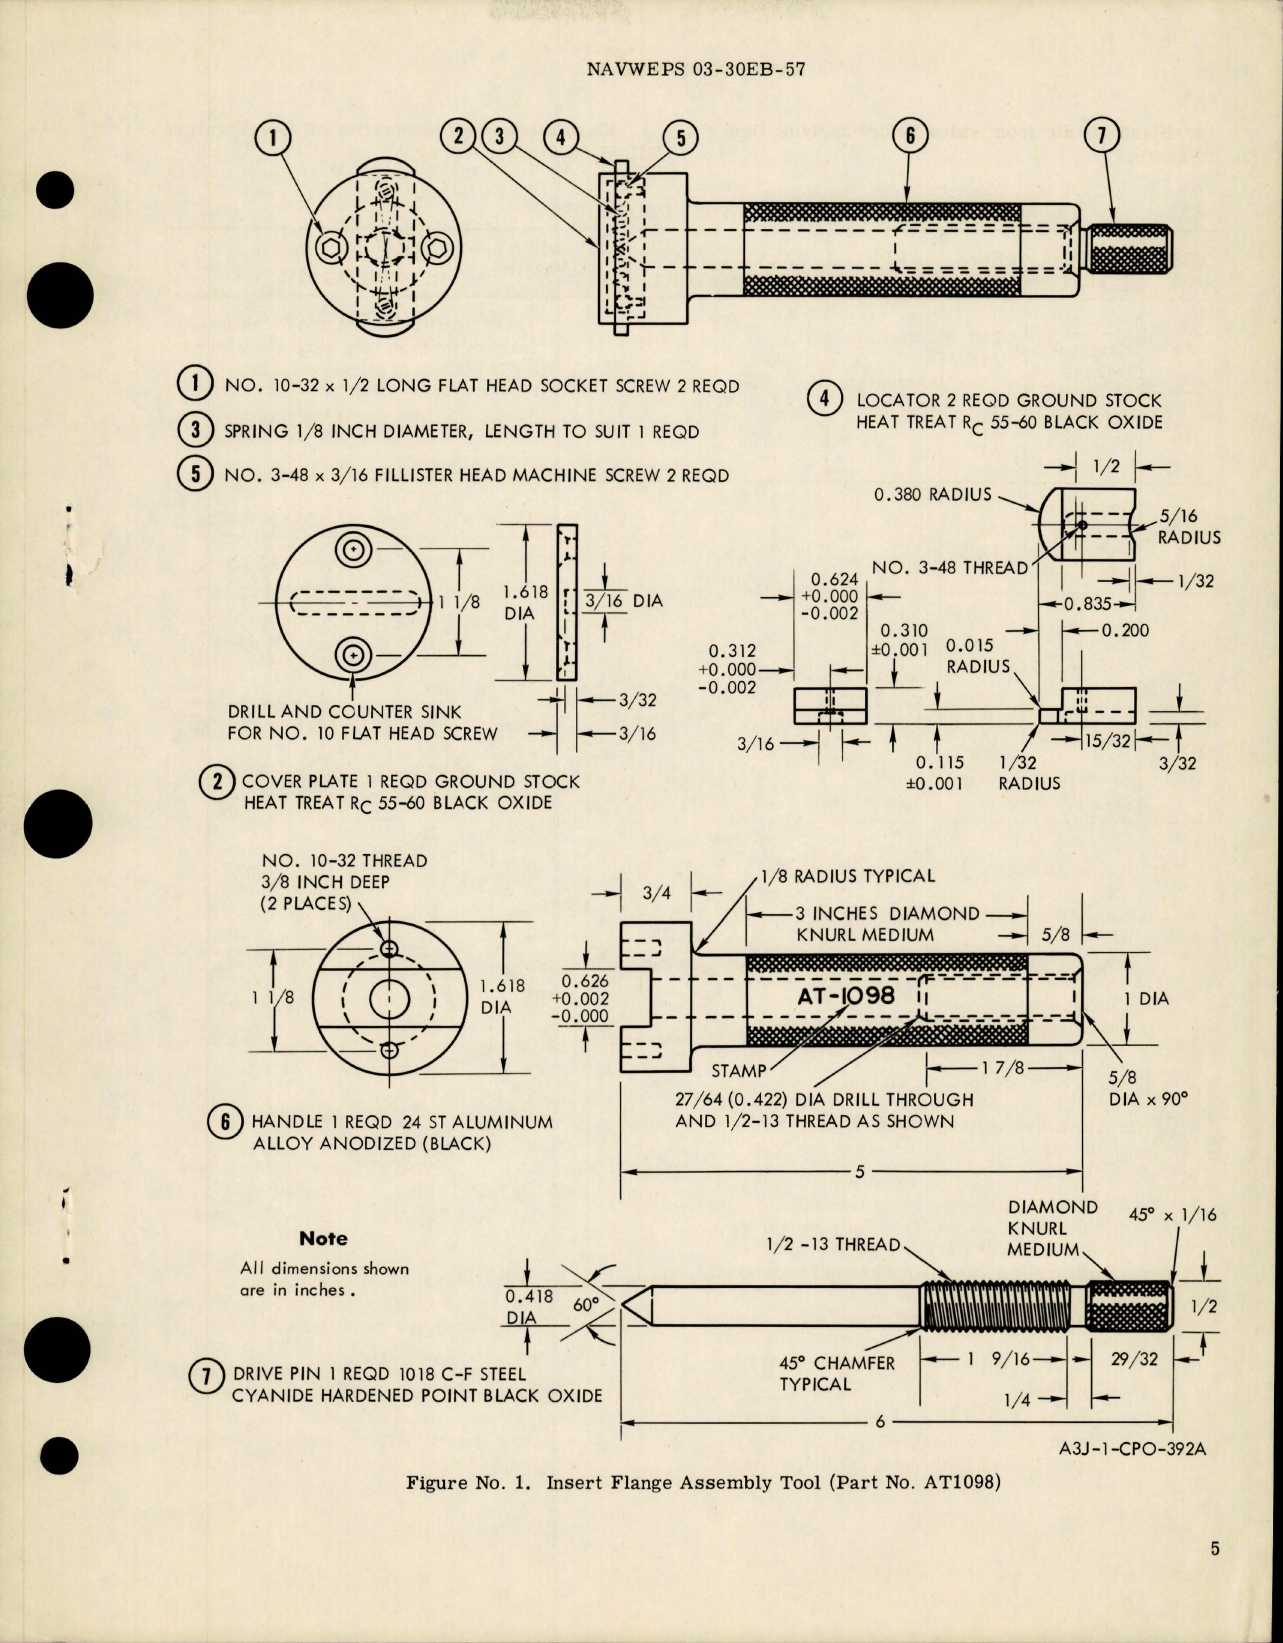 Sample page 5 from AirCorps Library document: Overhaul Instructions with Parts for Pressure Actuated Slide Shutoff Valve Assembly - Part 131395 